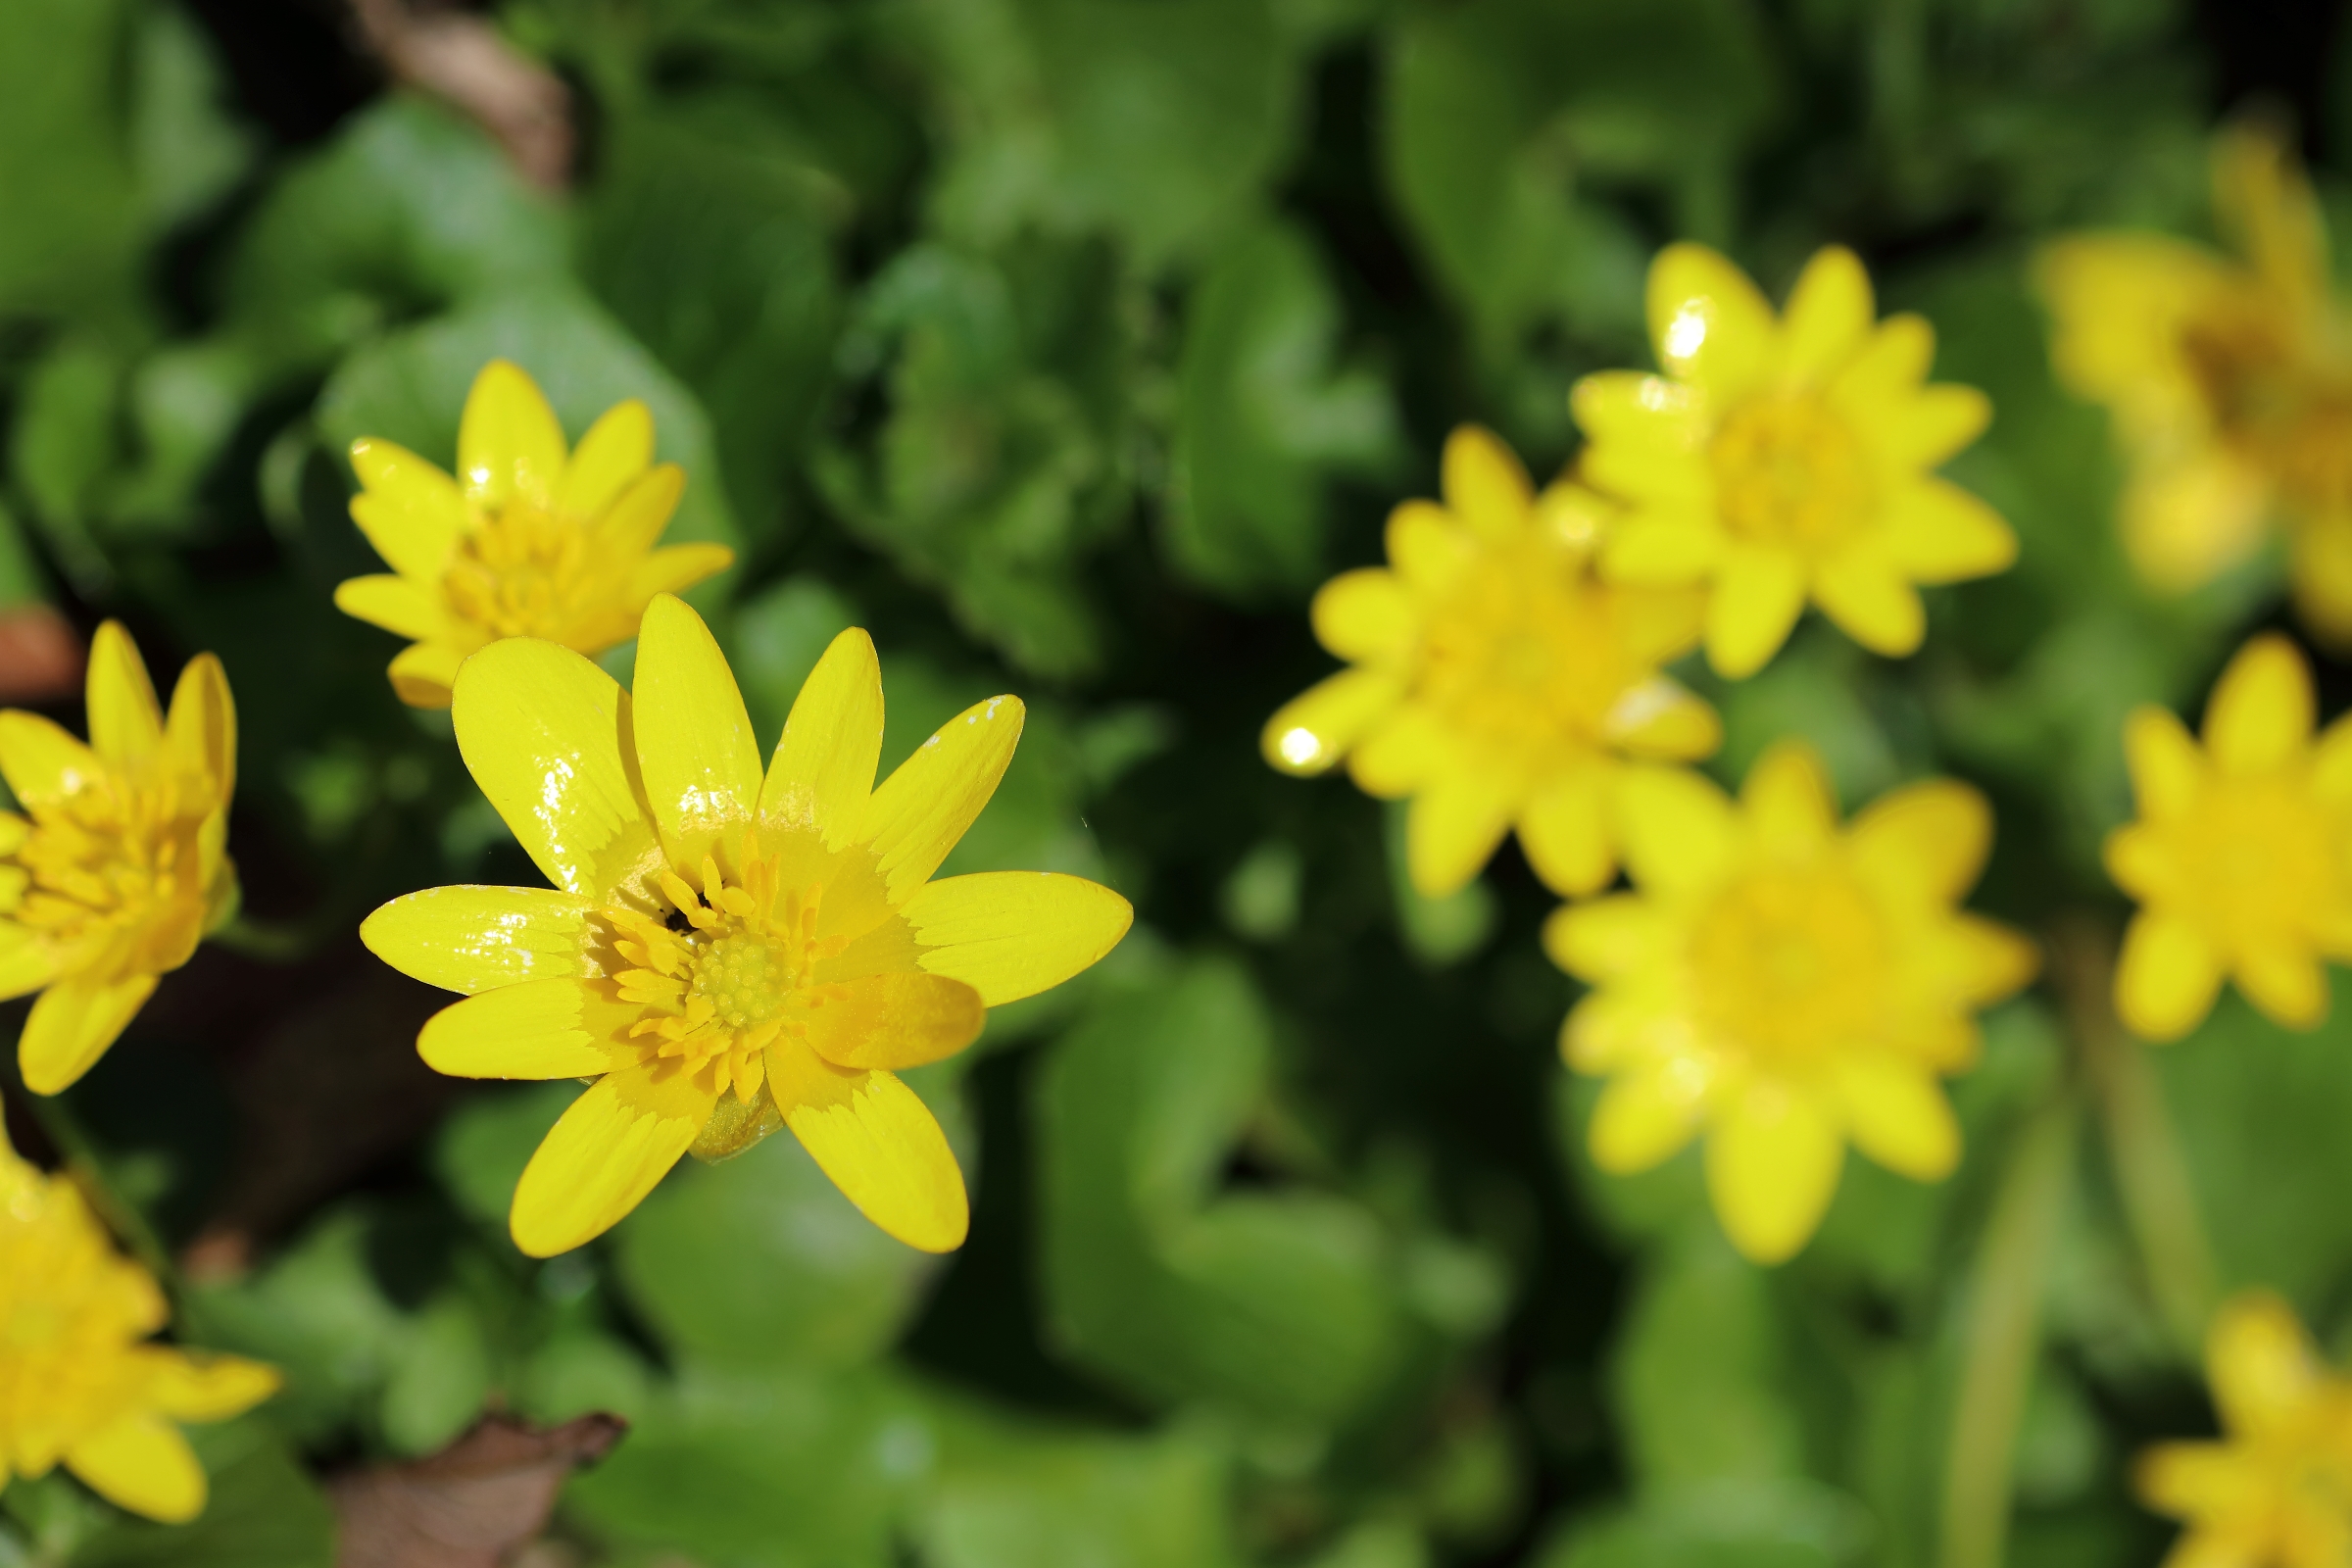 A group of blossoms of the lesser celandine